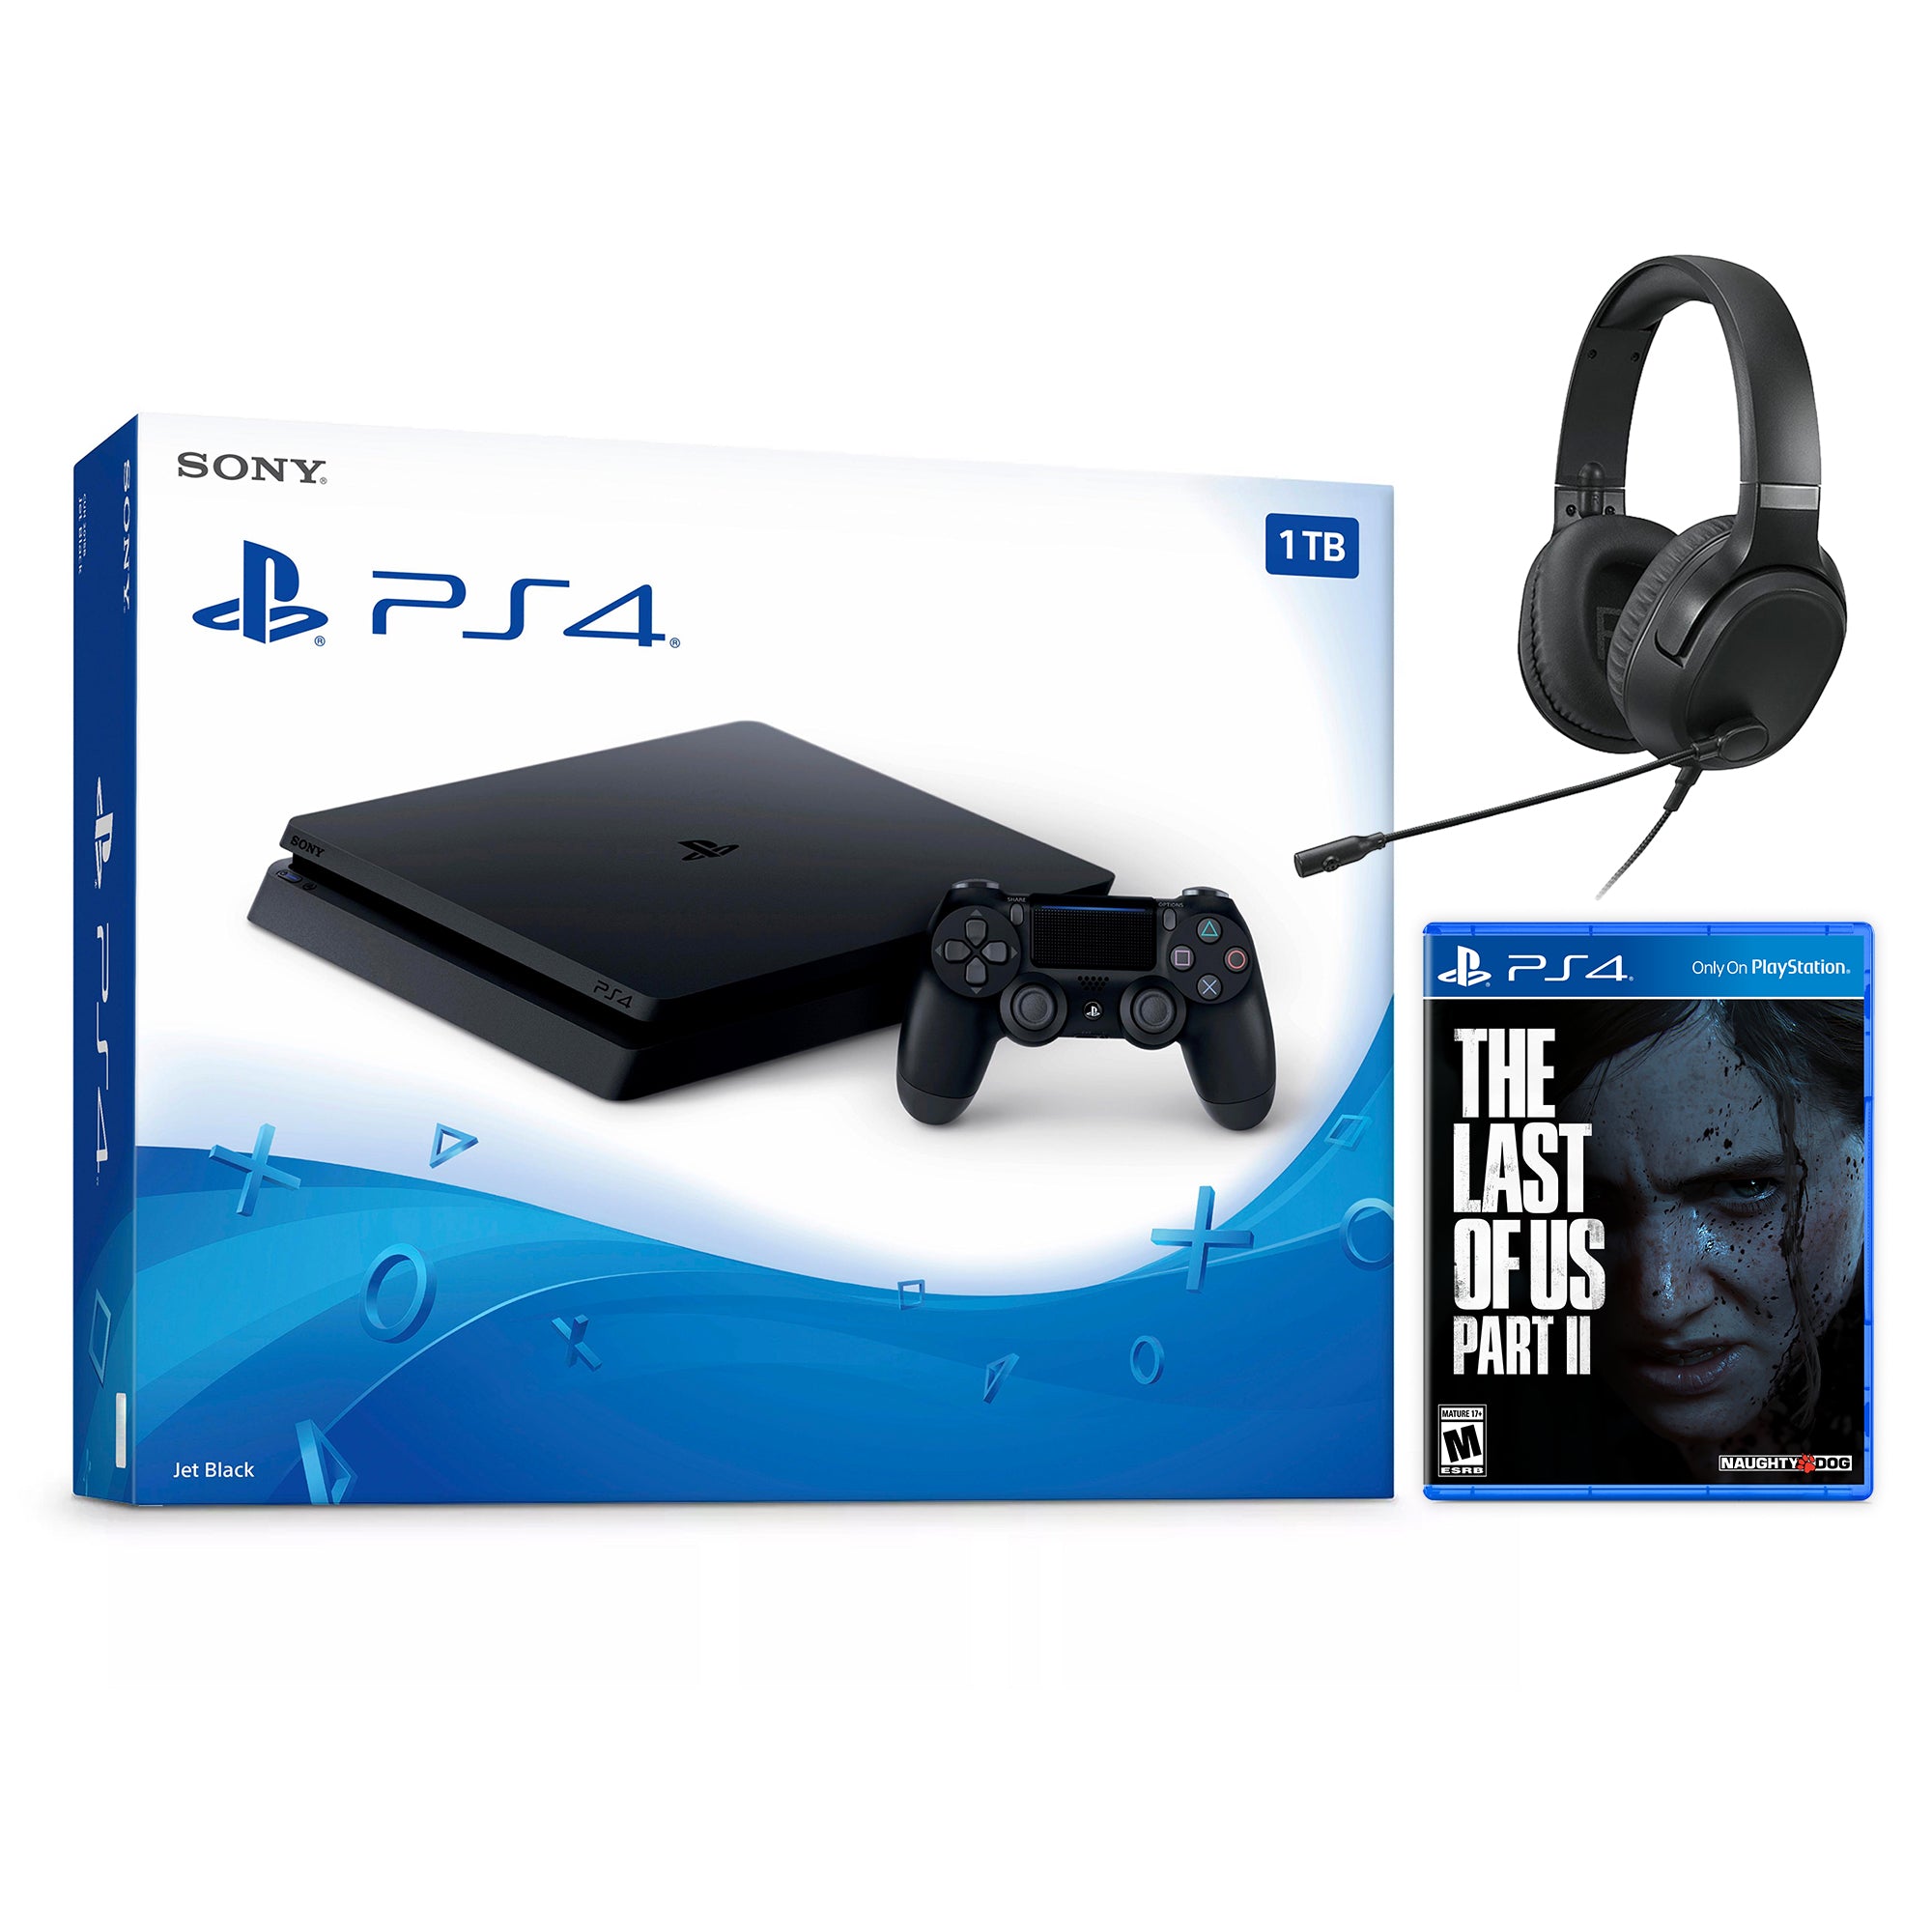 Sony PlayStation 4 Slim Ratchet & Clank Bundle 1TB PS4 Gaming Console, Jet Black, with Mytrix Chat Headset